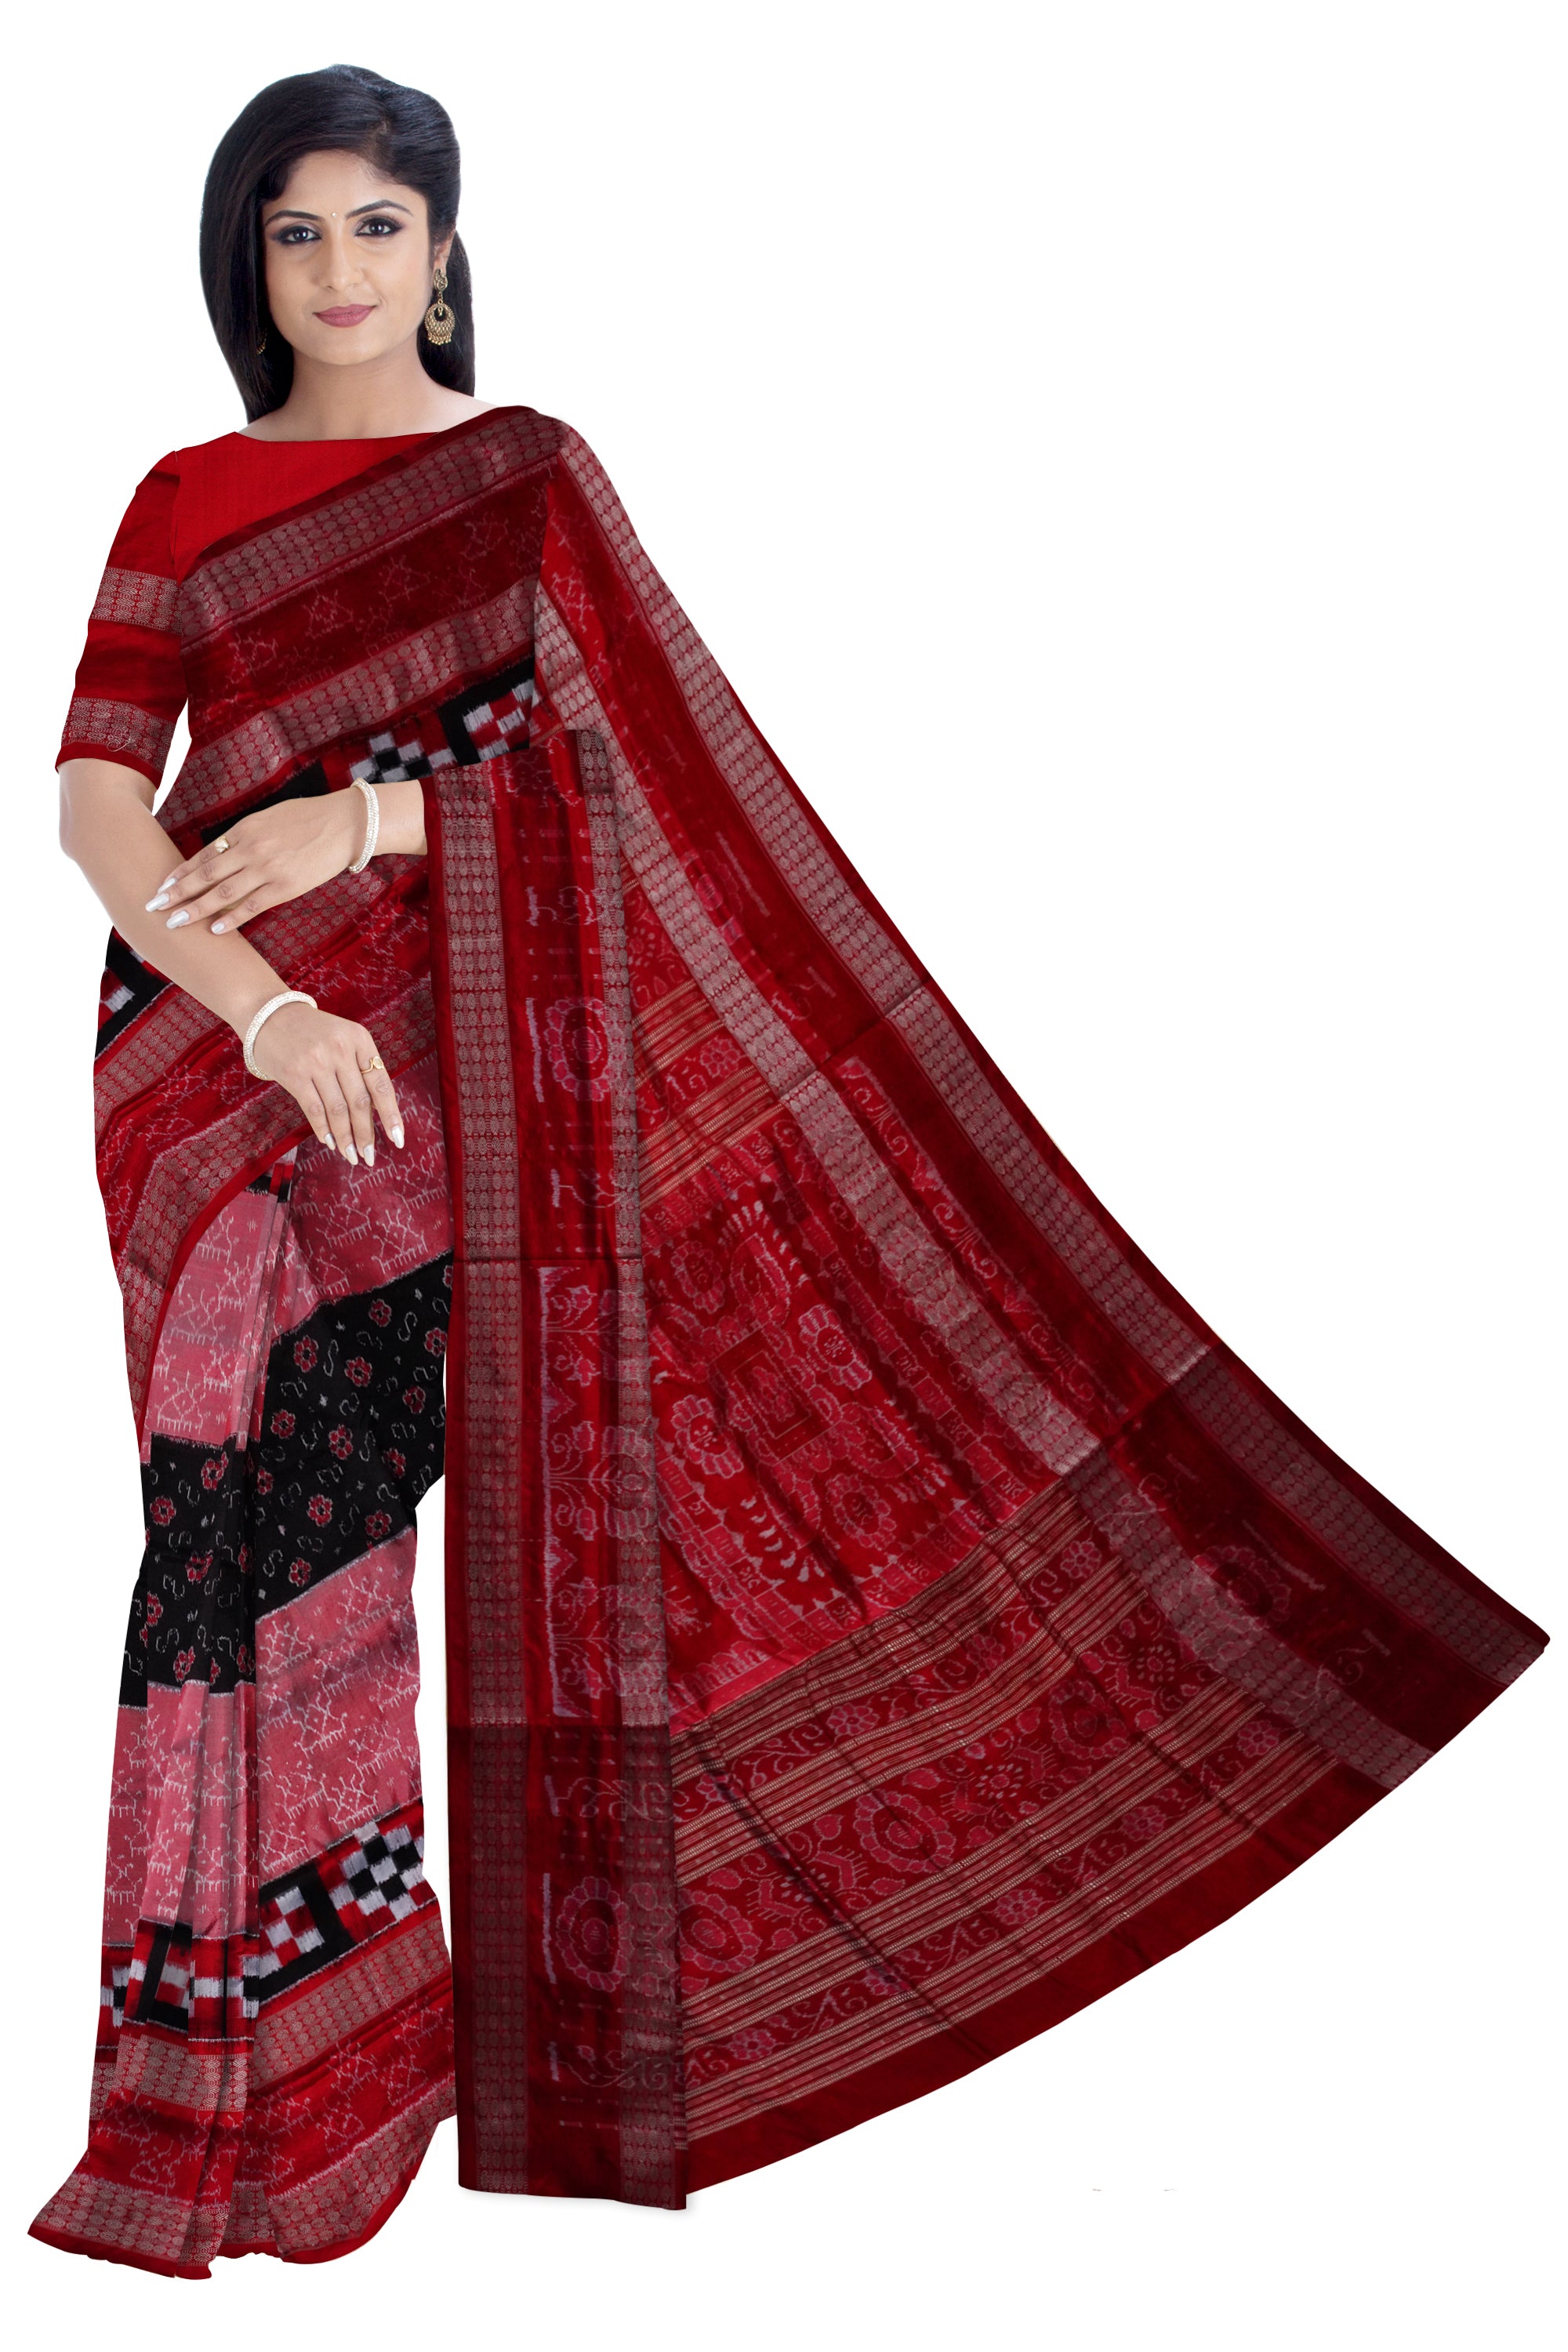 Baby-pink,Black and Red color flowers with pasapali pattern pure silk pata saree with double rudraksha border design. - Koshali Arts & Crafts Enterprise